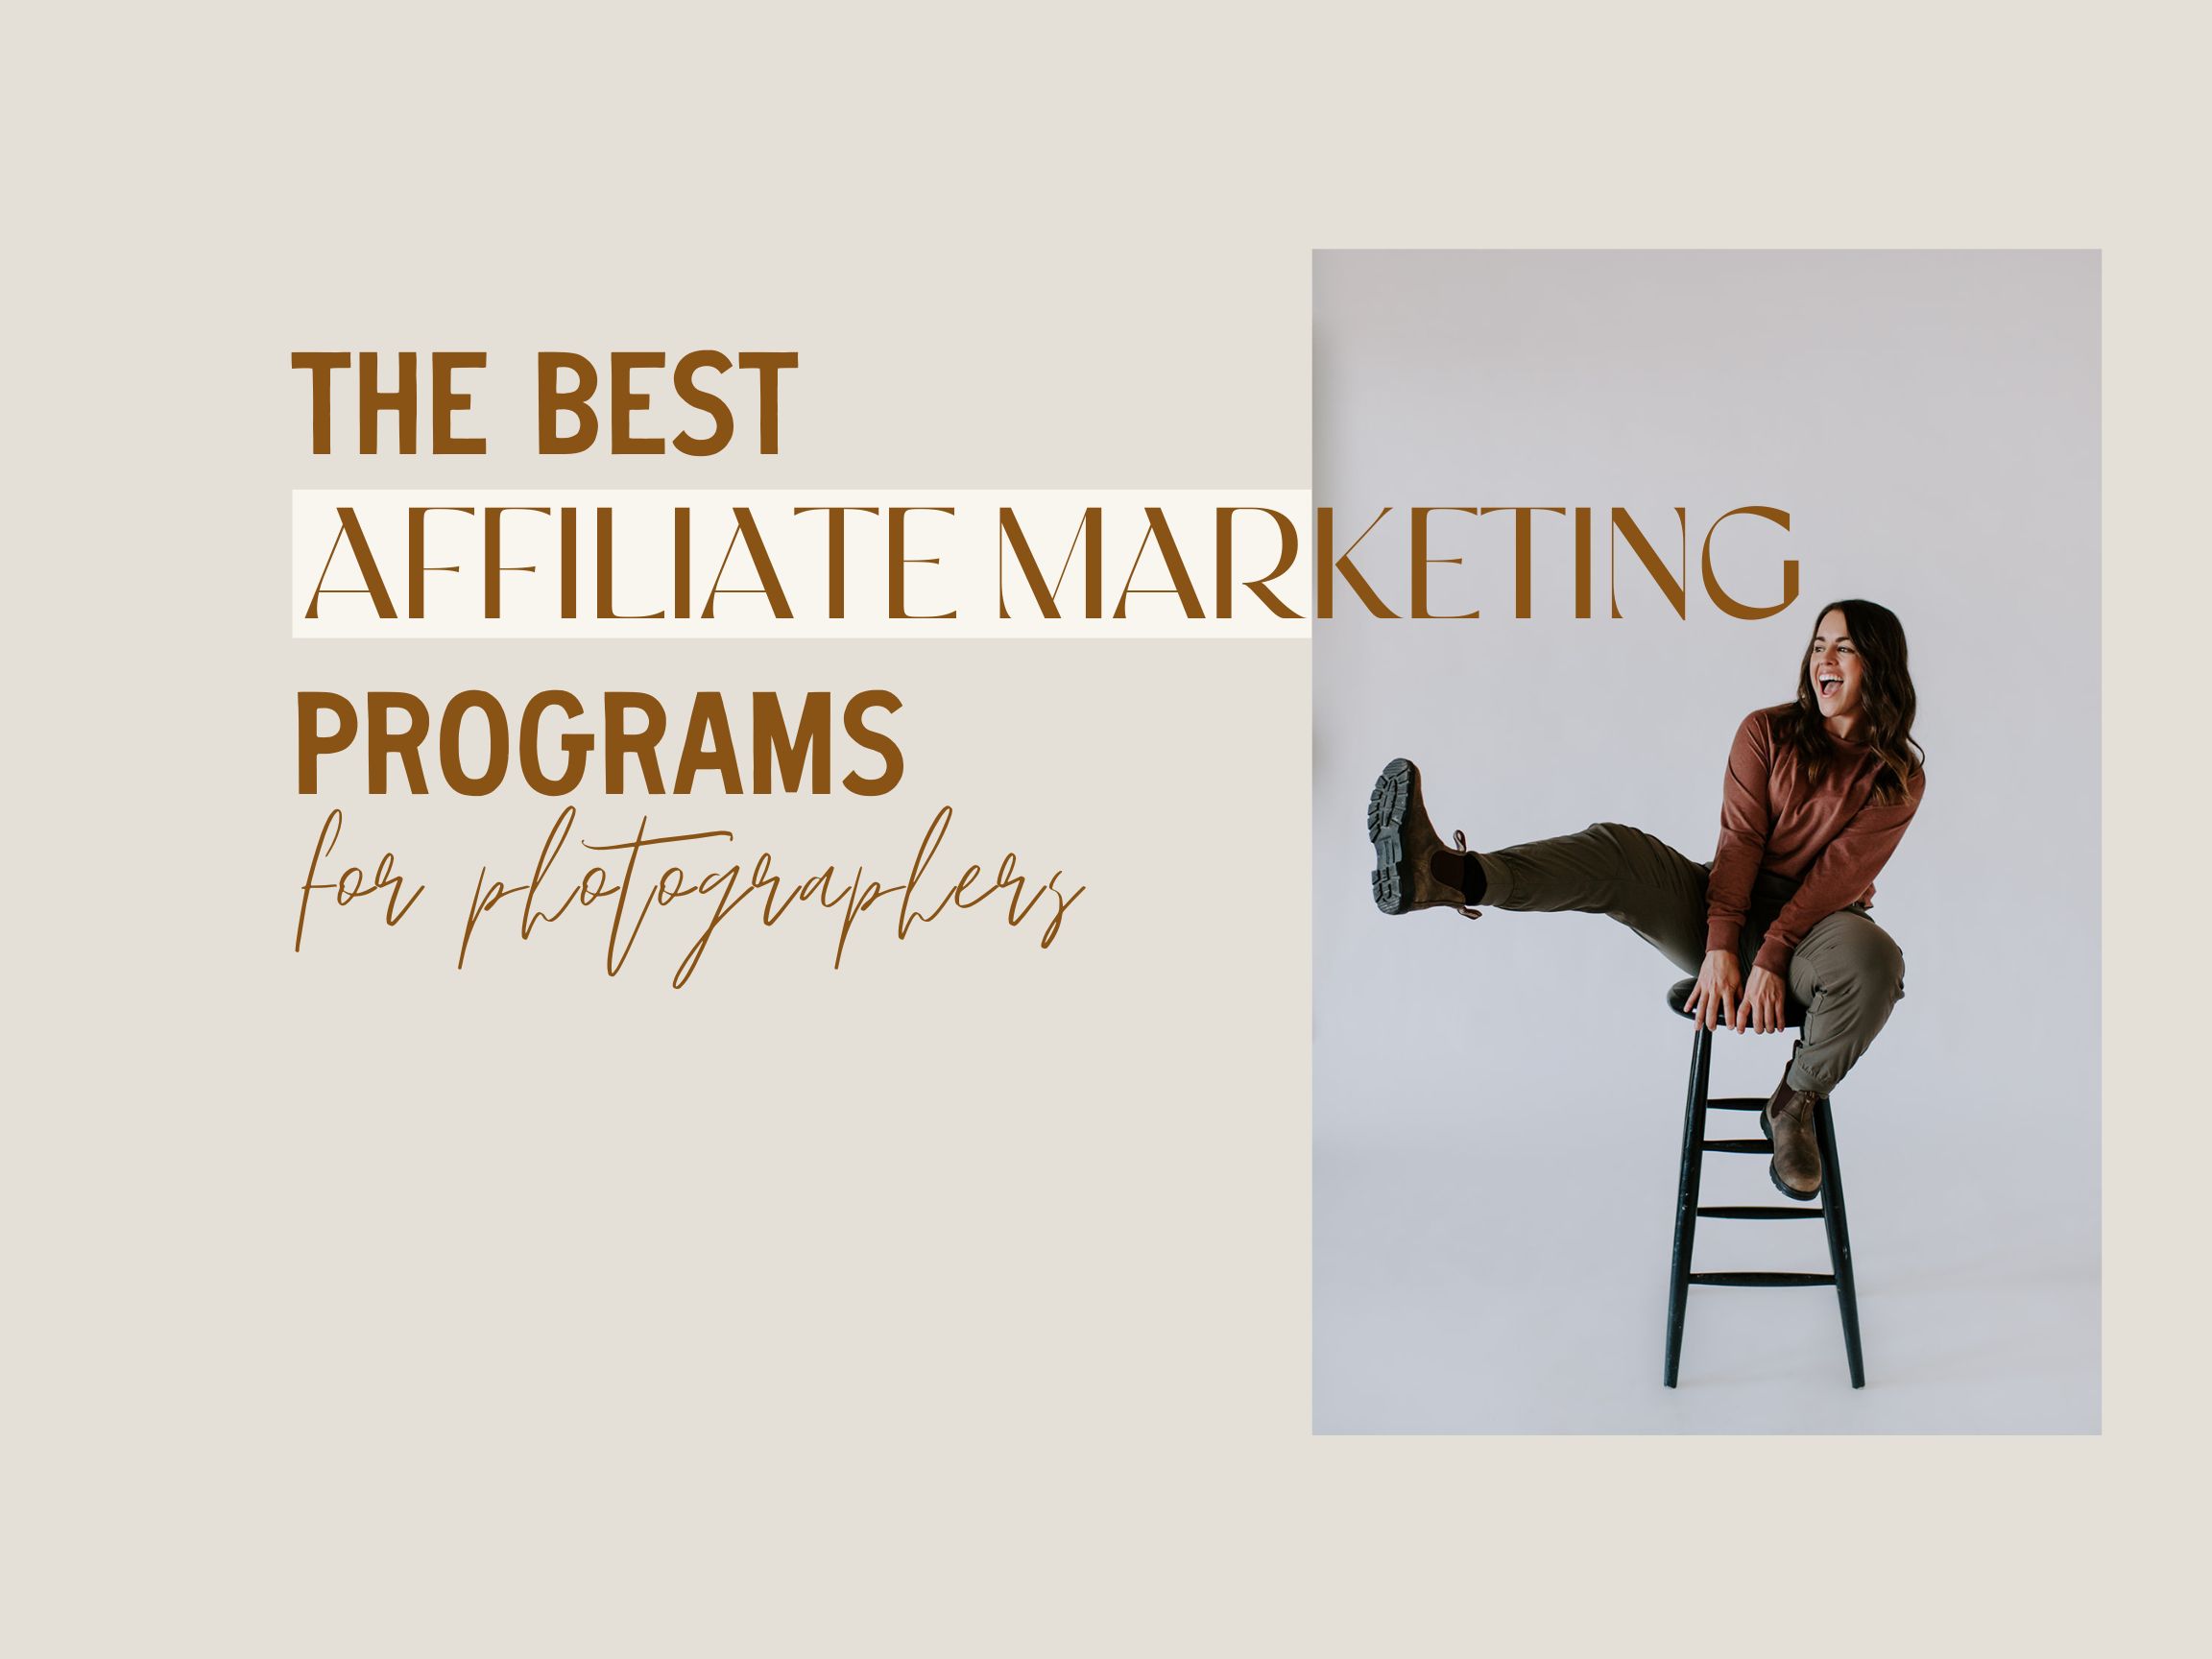 The Best Affiliate Marketing Programs for Photographers - Kelsey Converse  Photo